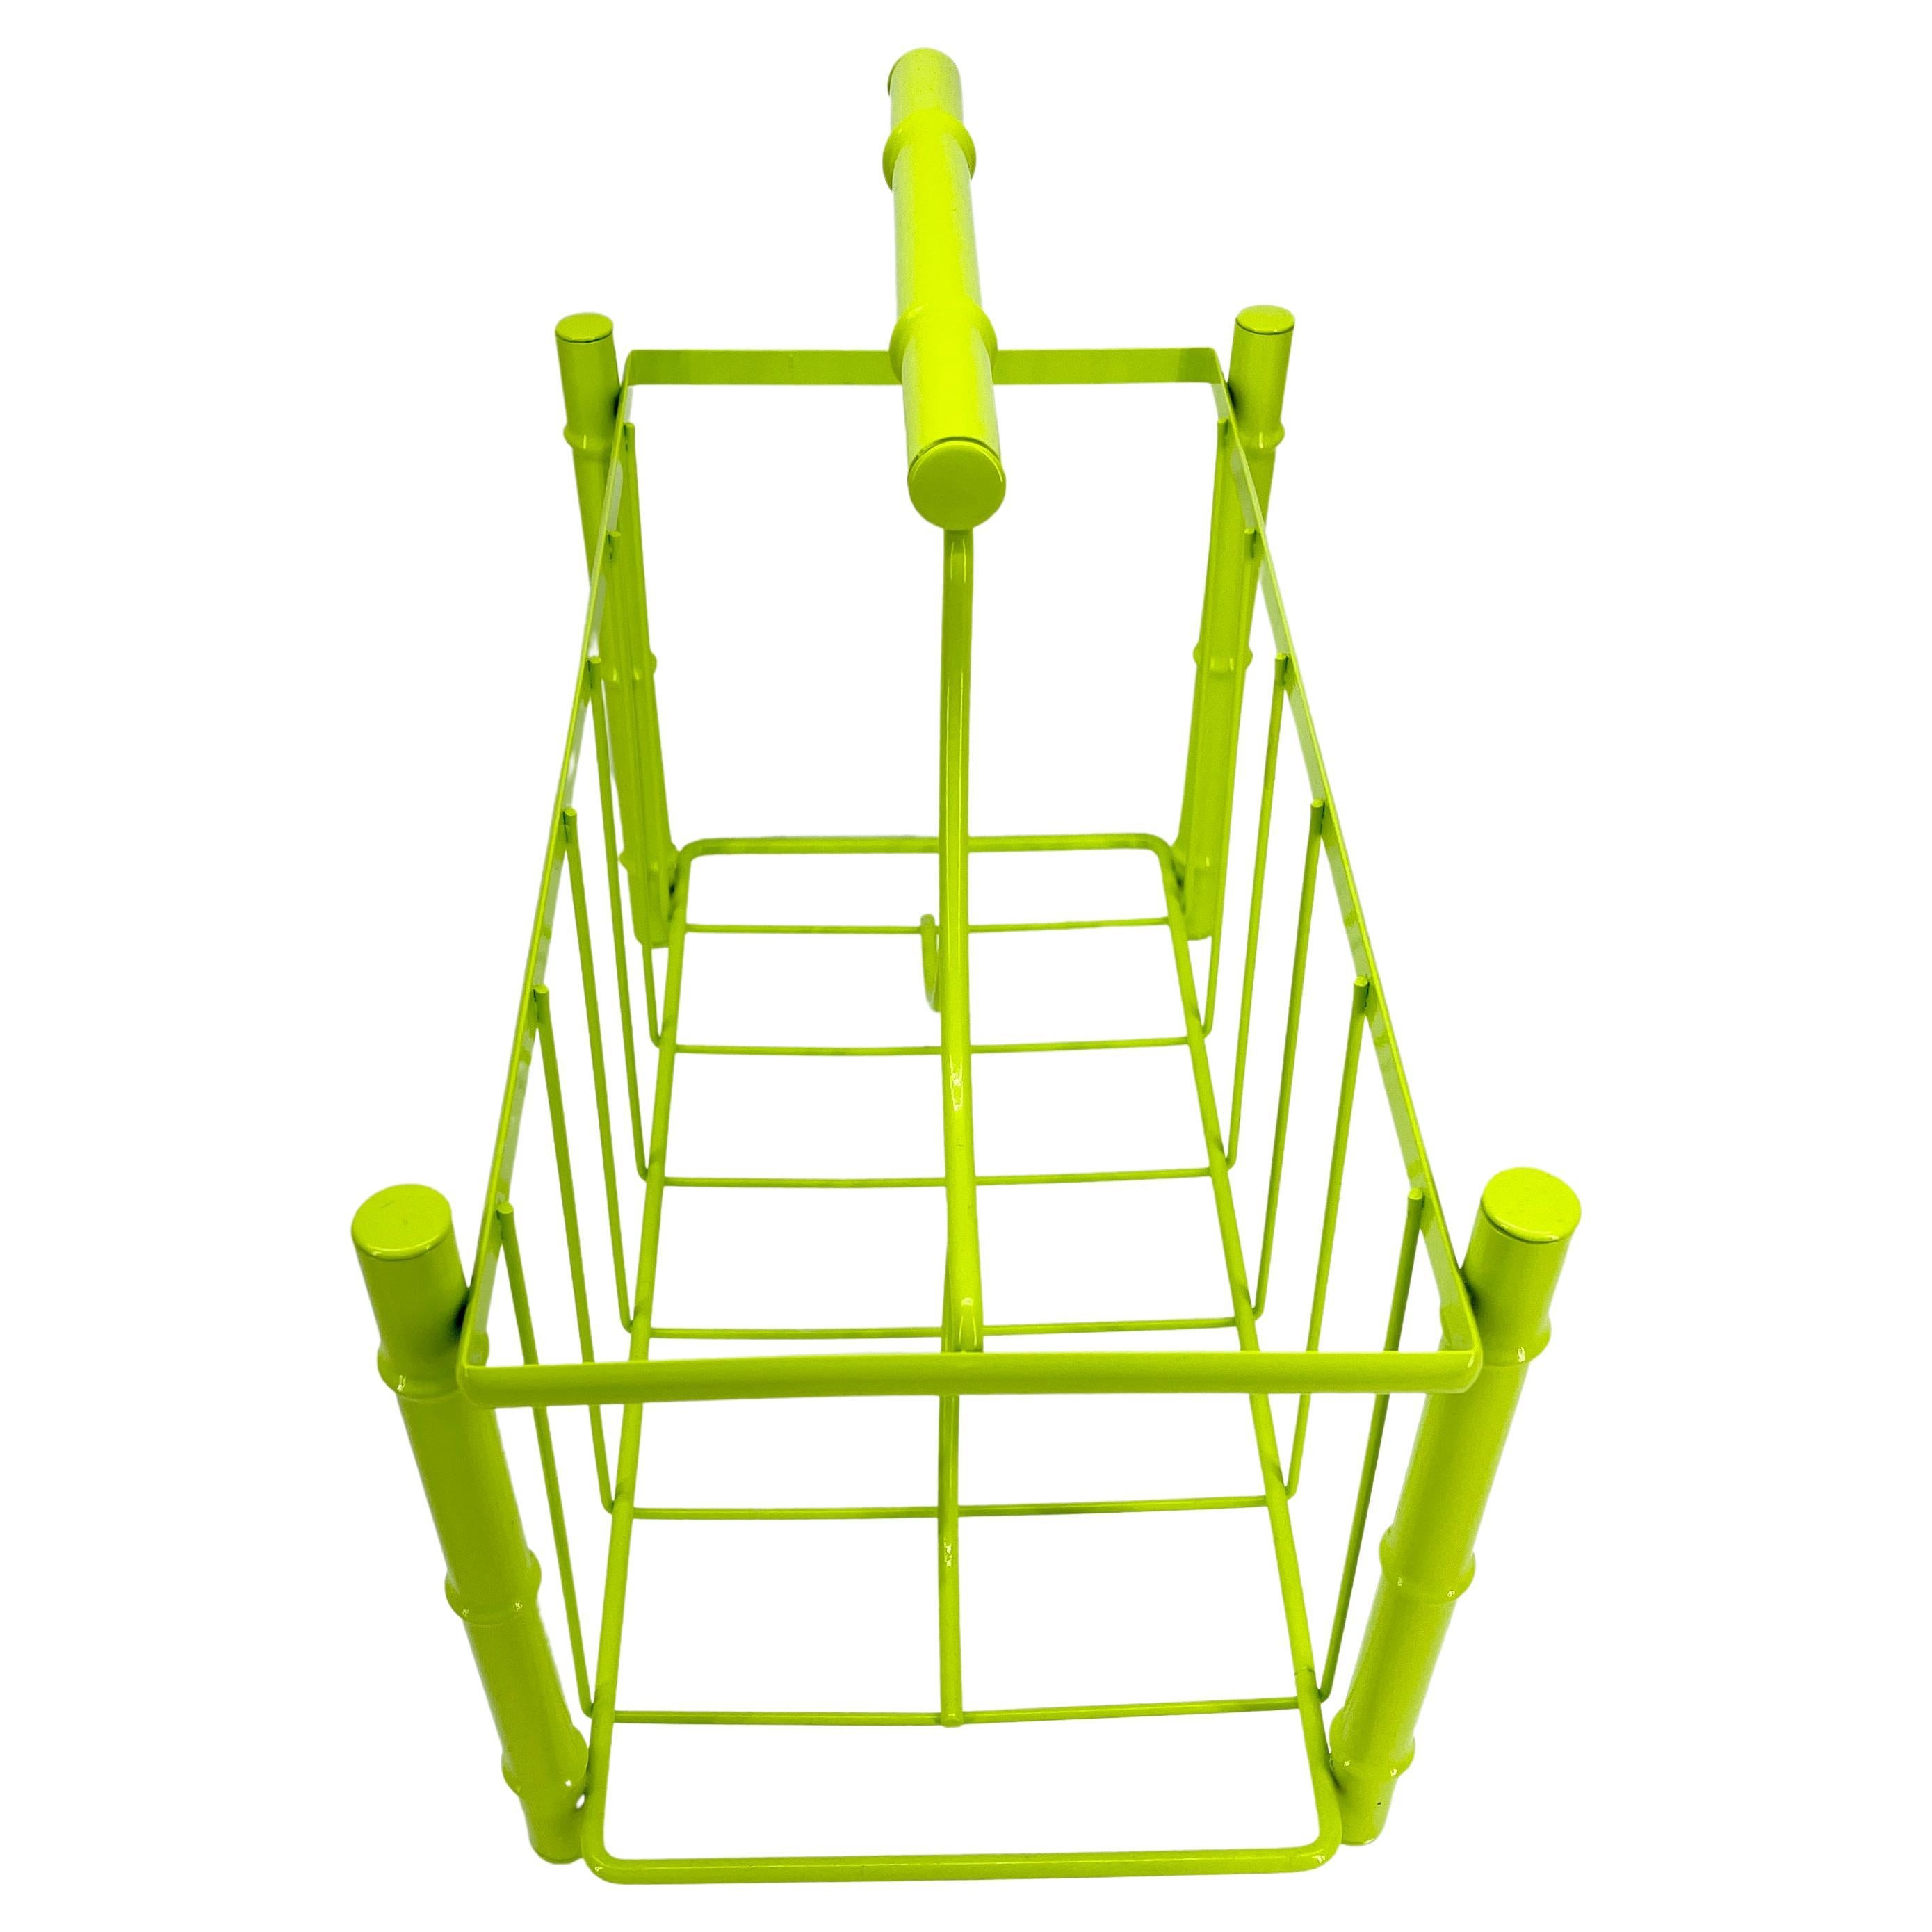 Late 20th Century Mid-Century Modern Faux Bamboo Magazine Rack, Powder Coated Bright Chartreuse For Sale